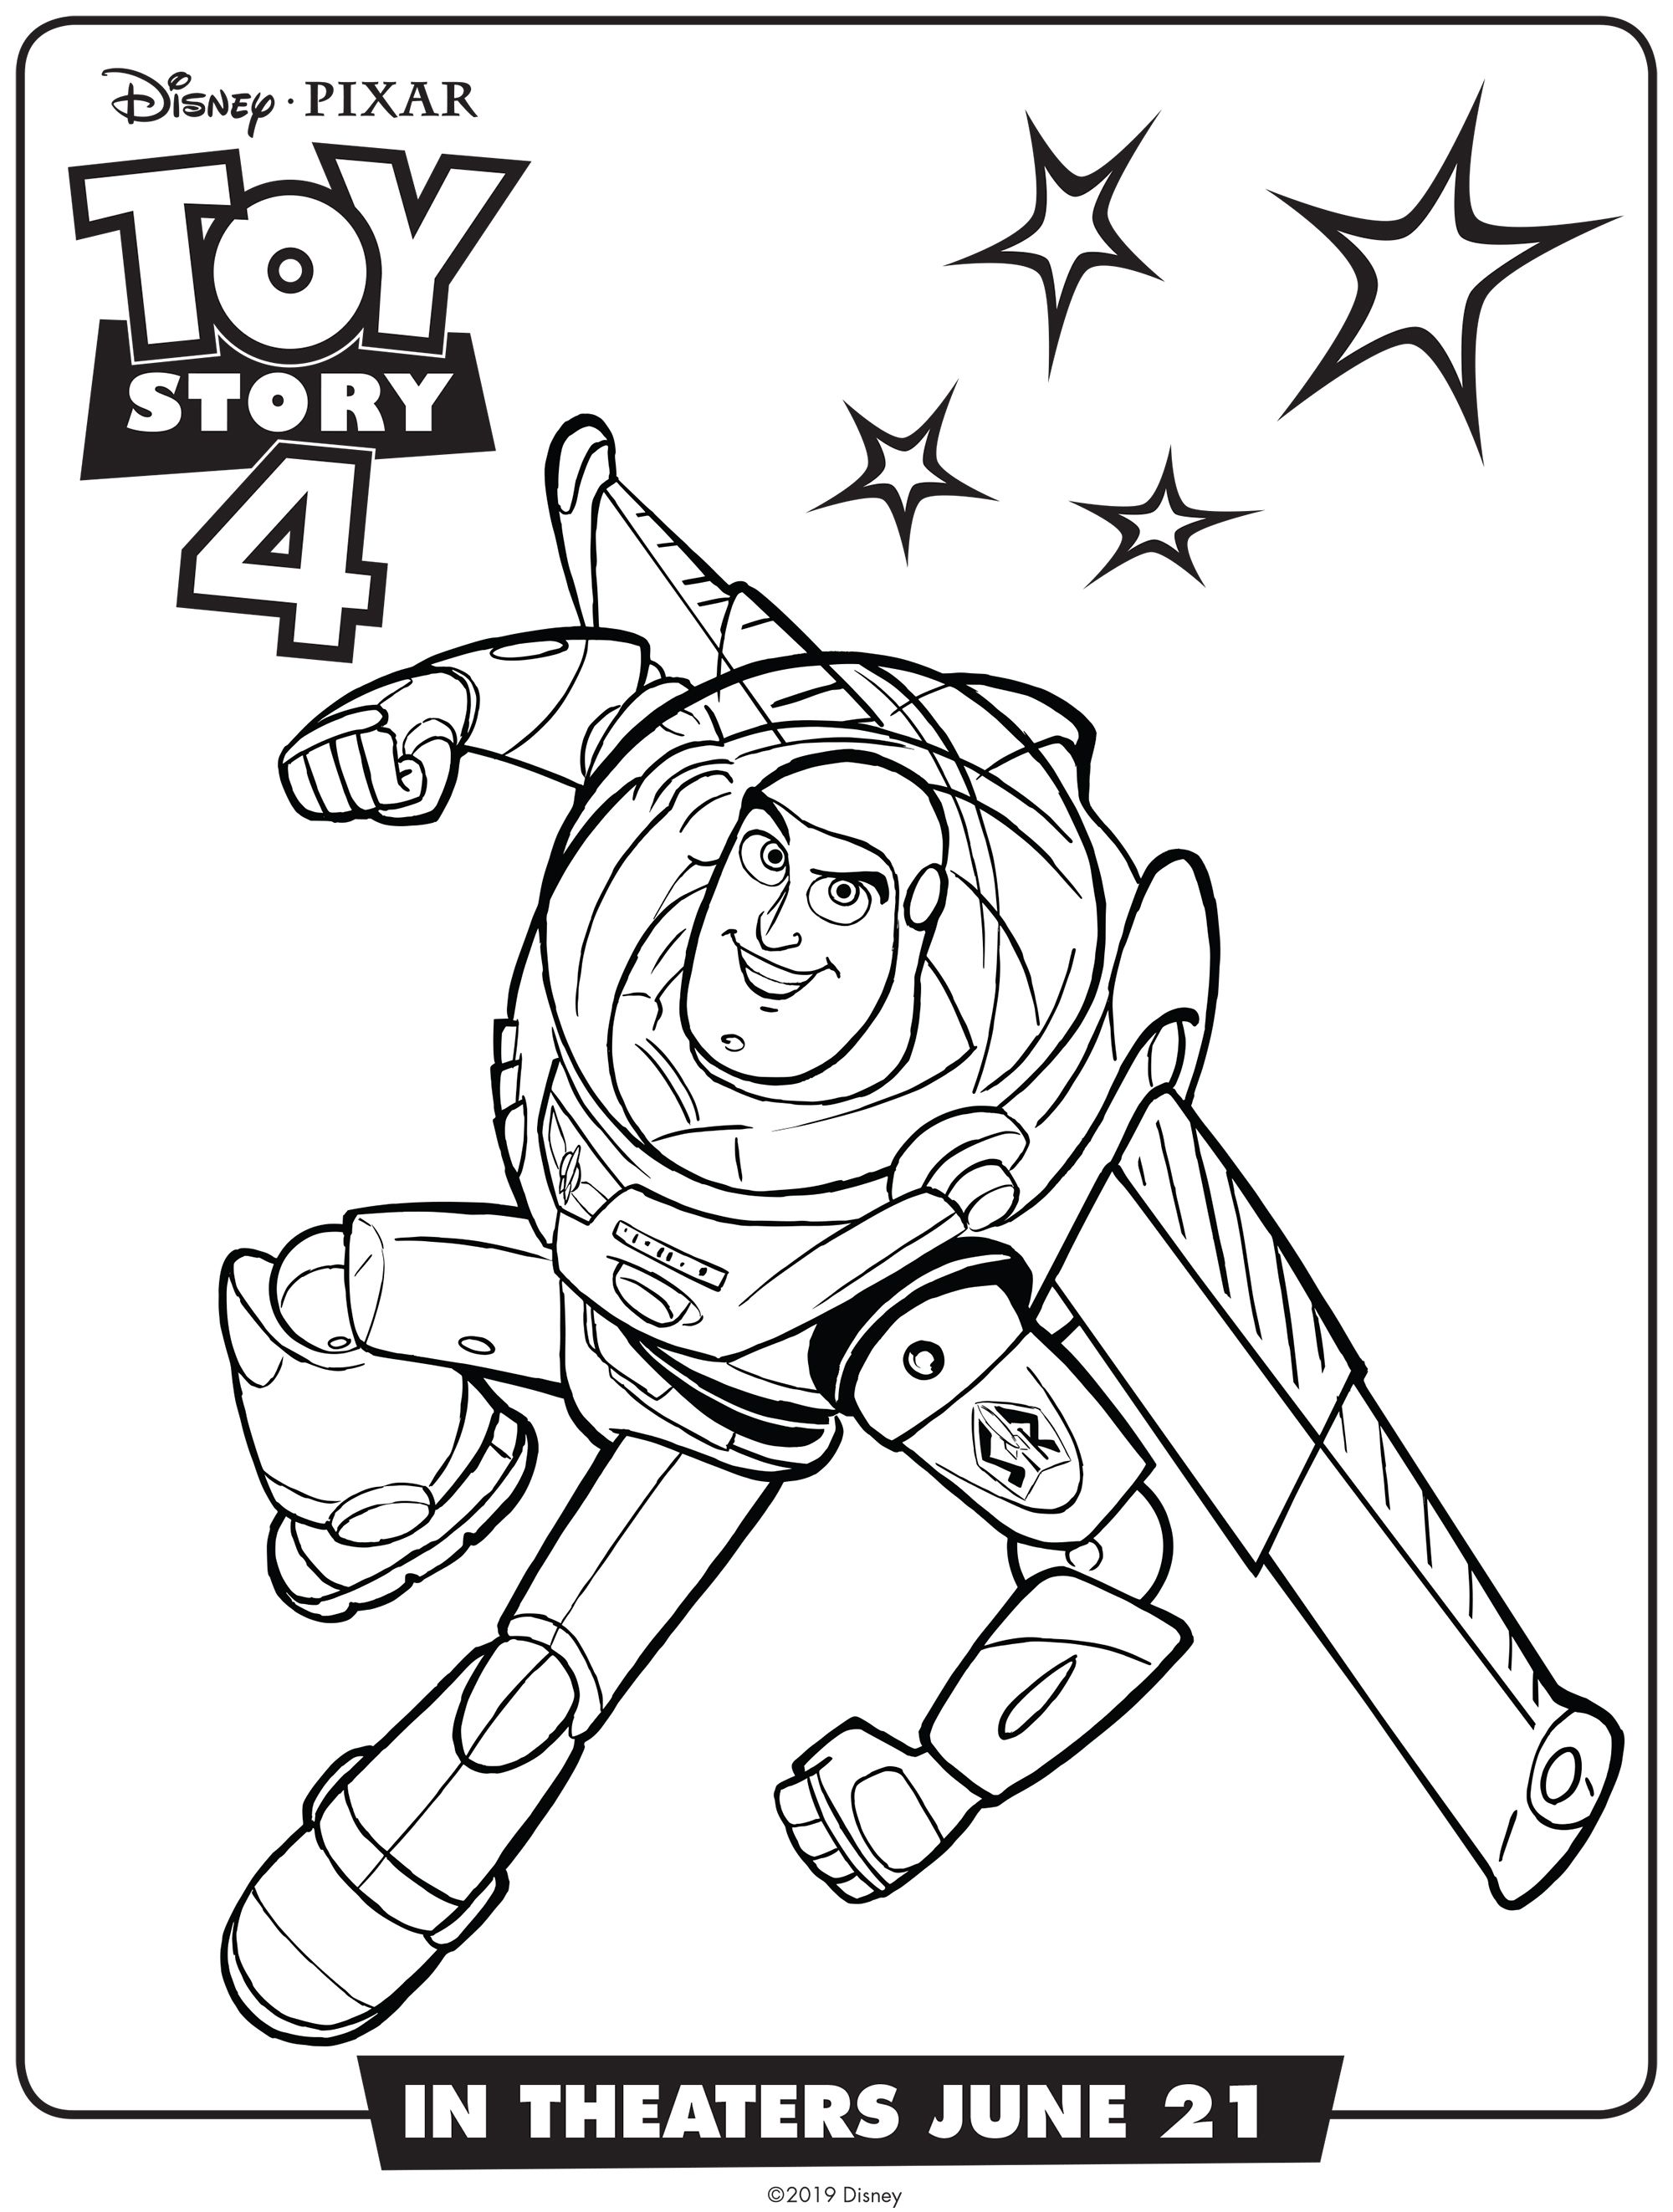 Buzz Lightyear : Toy Story 4 coloring page (Disney / Pixar) Toy Story